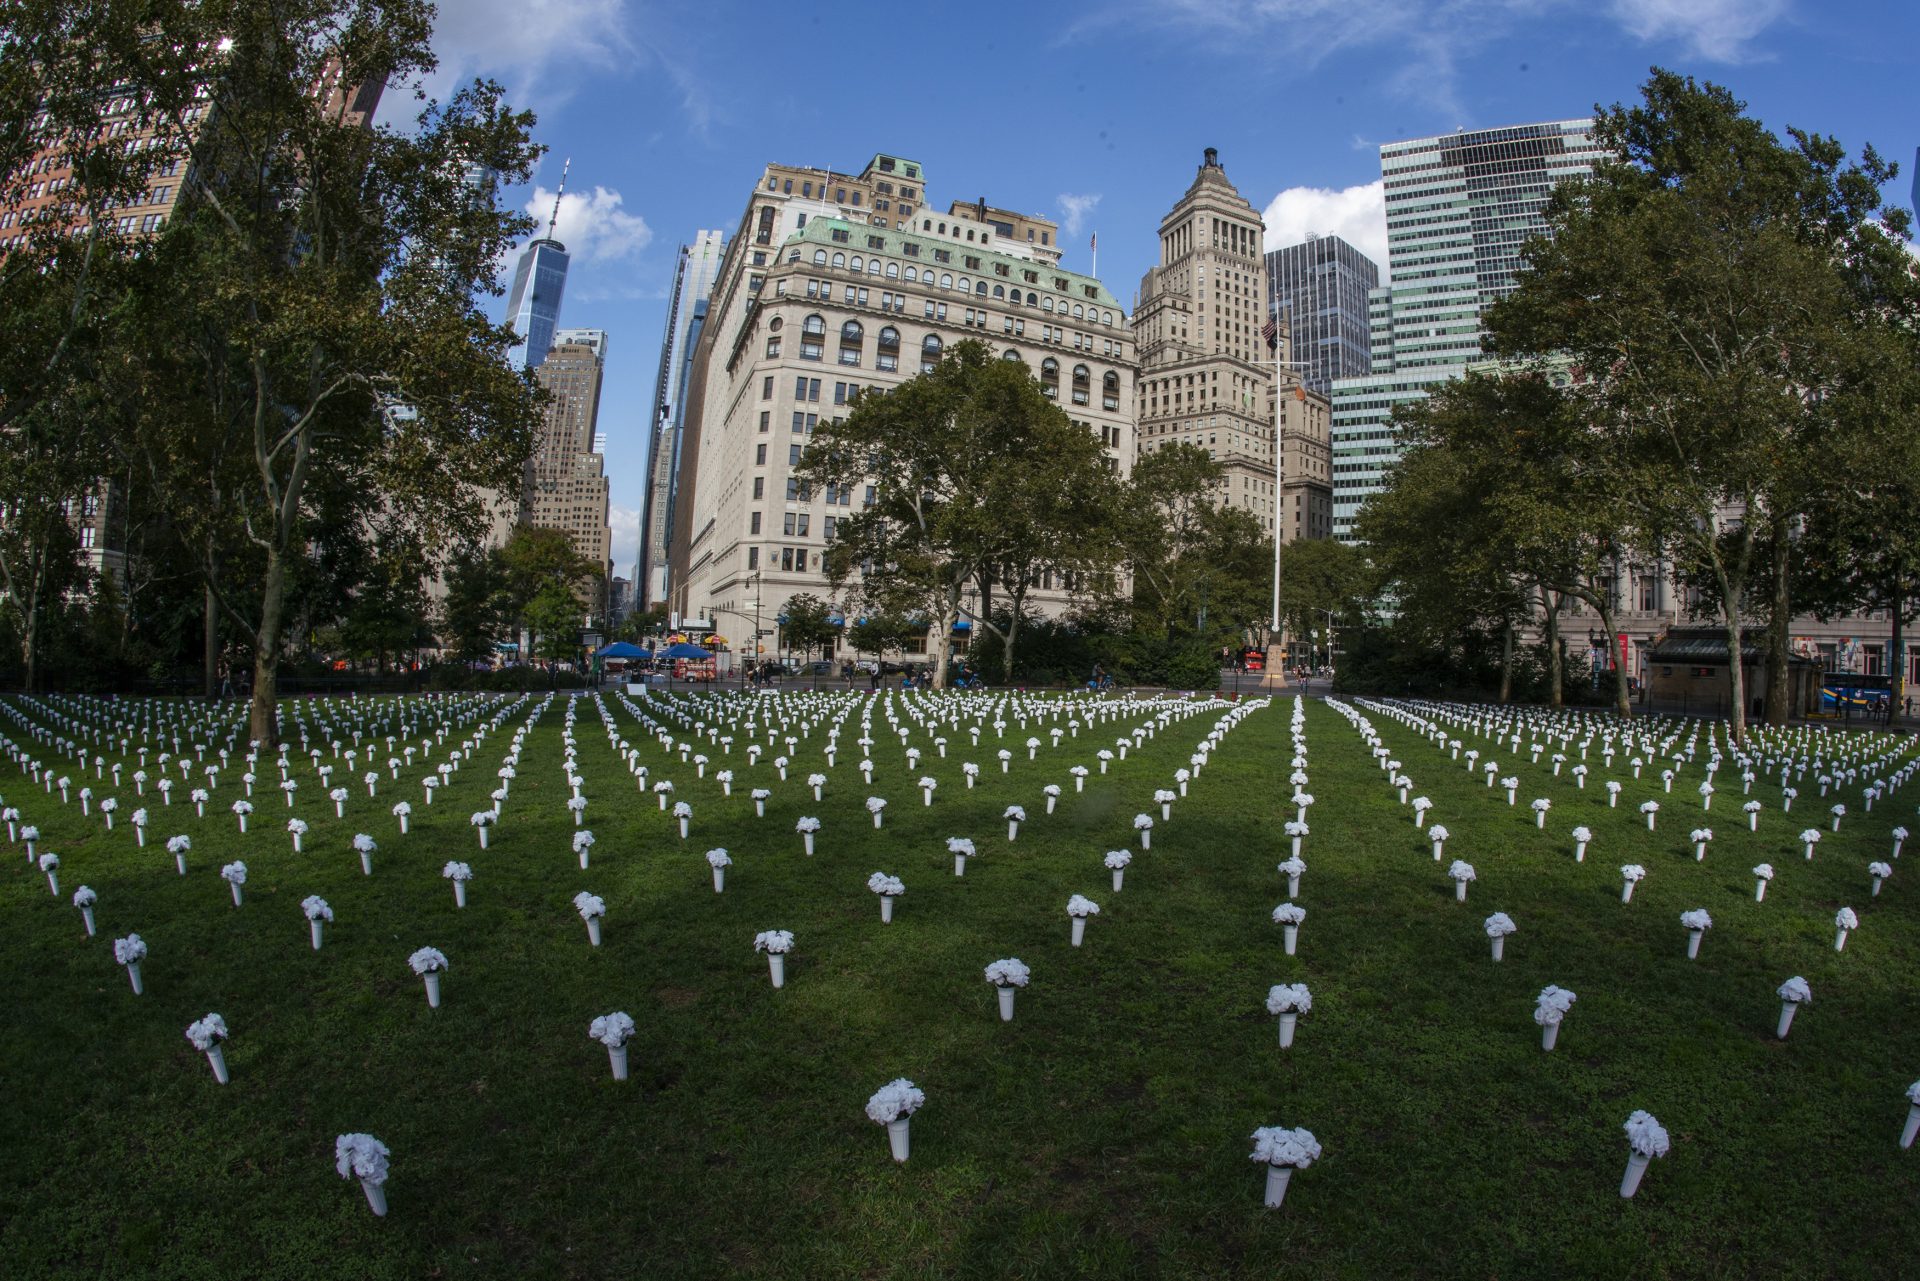 Vases full of white flowers, that are part of an installation of One-thousand-fifty vases filled with white flowers, representing 1,050 lives lost by gun violence in New York last year, while they are displayed at Battery Park, Thursday, Oct. 7, 2021, in New York.